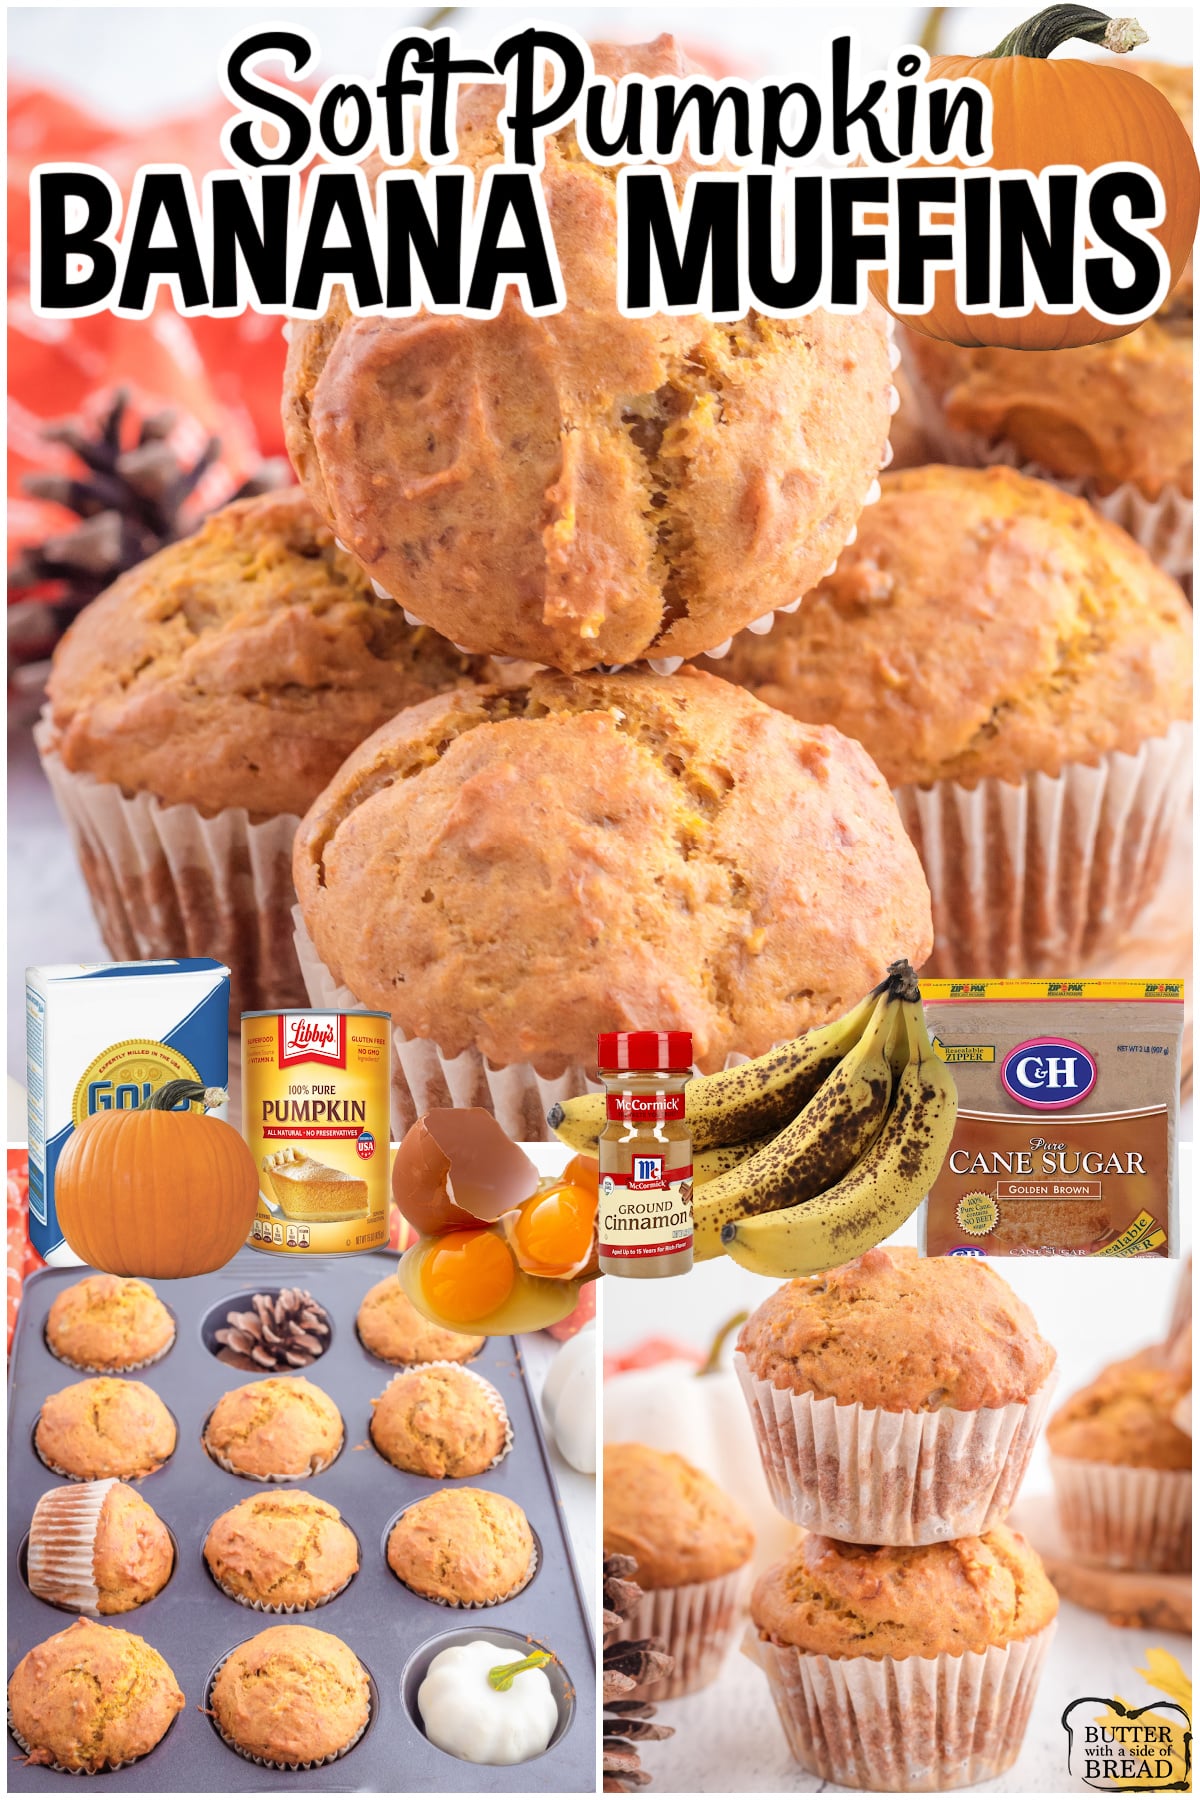 Pumpkin Banana Muffins made with classic ingredients like pumpkin, mashed bananas, cinnamon, brown sugar & maple syrup! You'll love the fantastic flavors in these soft, moist banana bread muffins. 